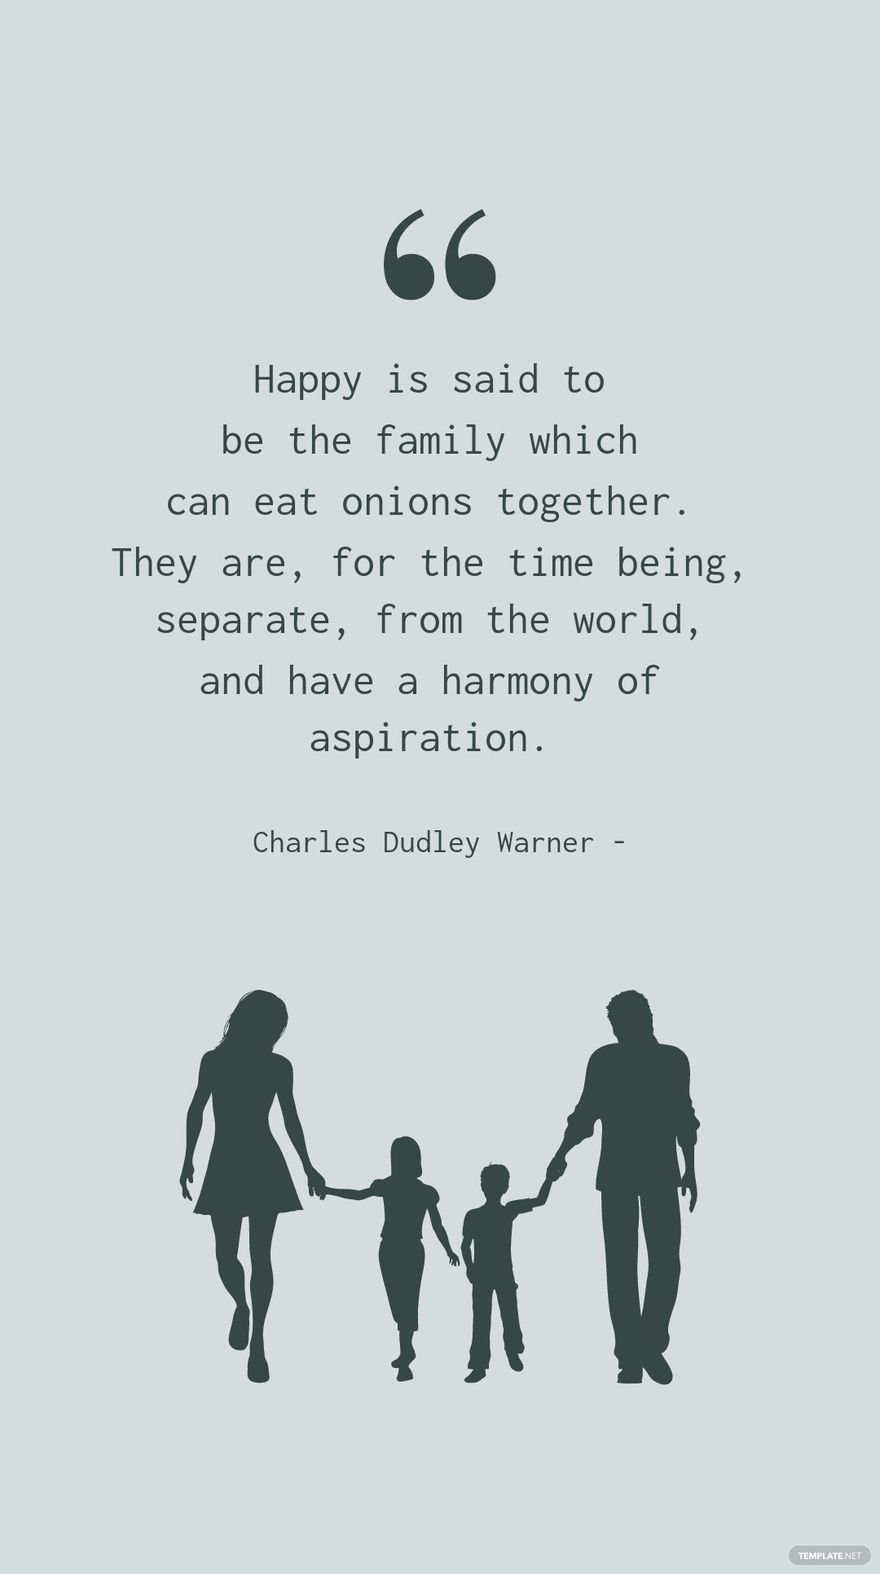 Free Charles Dudley Warner - Happy is said to be the family which can eat onions together. They are, for the time being, separate, from the world, and have a harmony of aspiration. in JPG